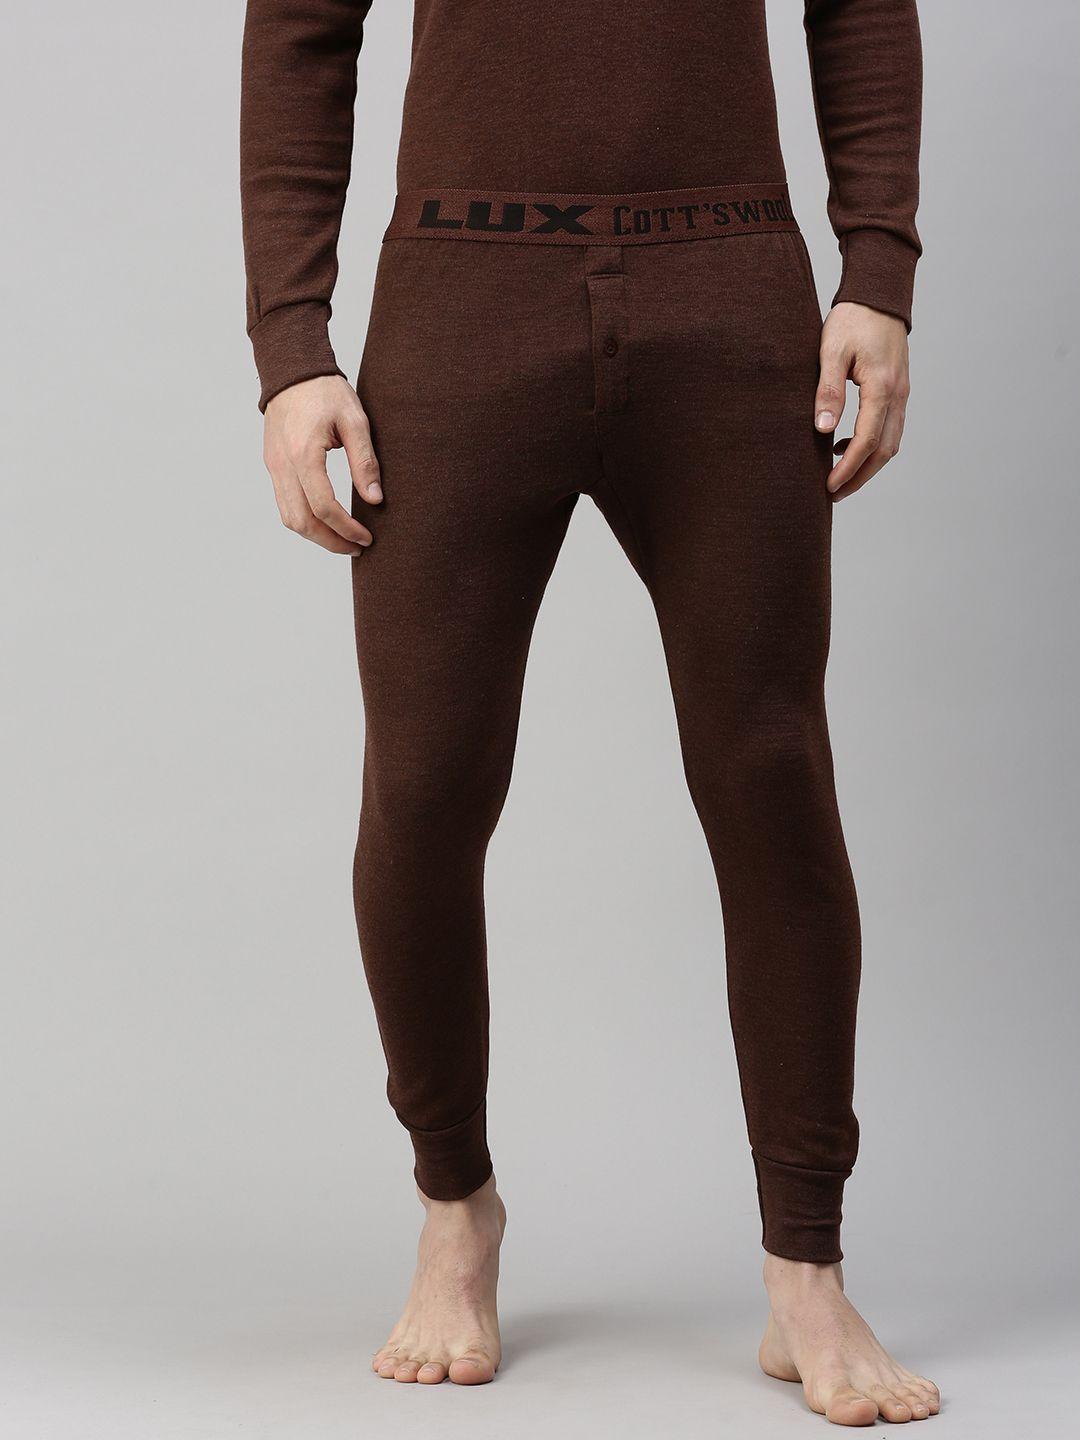 lux cottswool men brown ribbed thermal bottoms